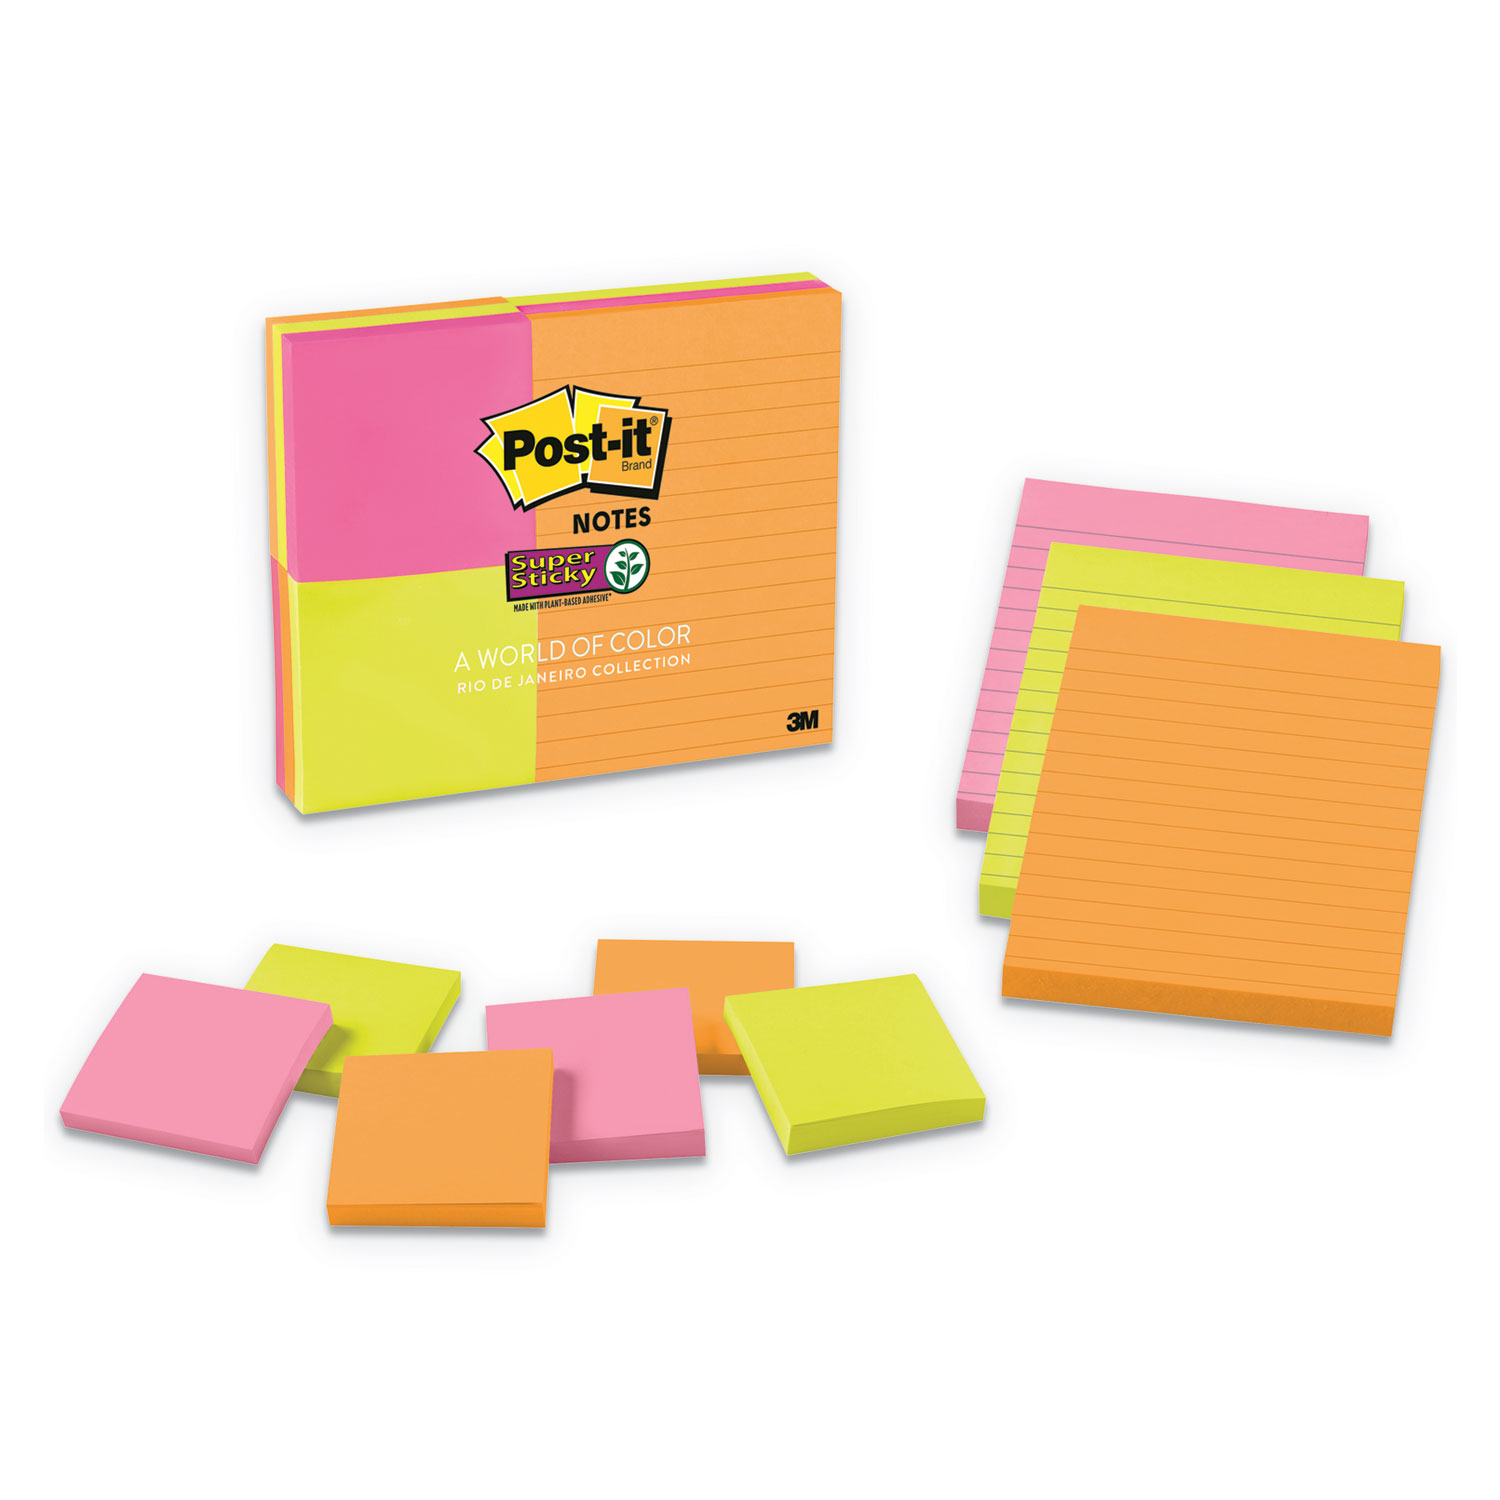  Post-it Notes Super Sticky 46339SSAU Pads in Rio de Janeiro Colors, (6) 3 x 3 & (3) 4 x 6, 90-Sheet Pads, 9 Pads/PK (MMM46339SSAU) 